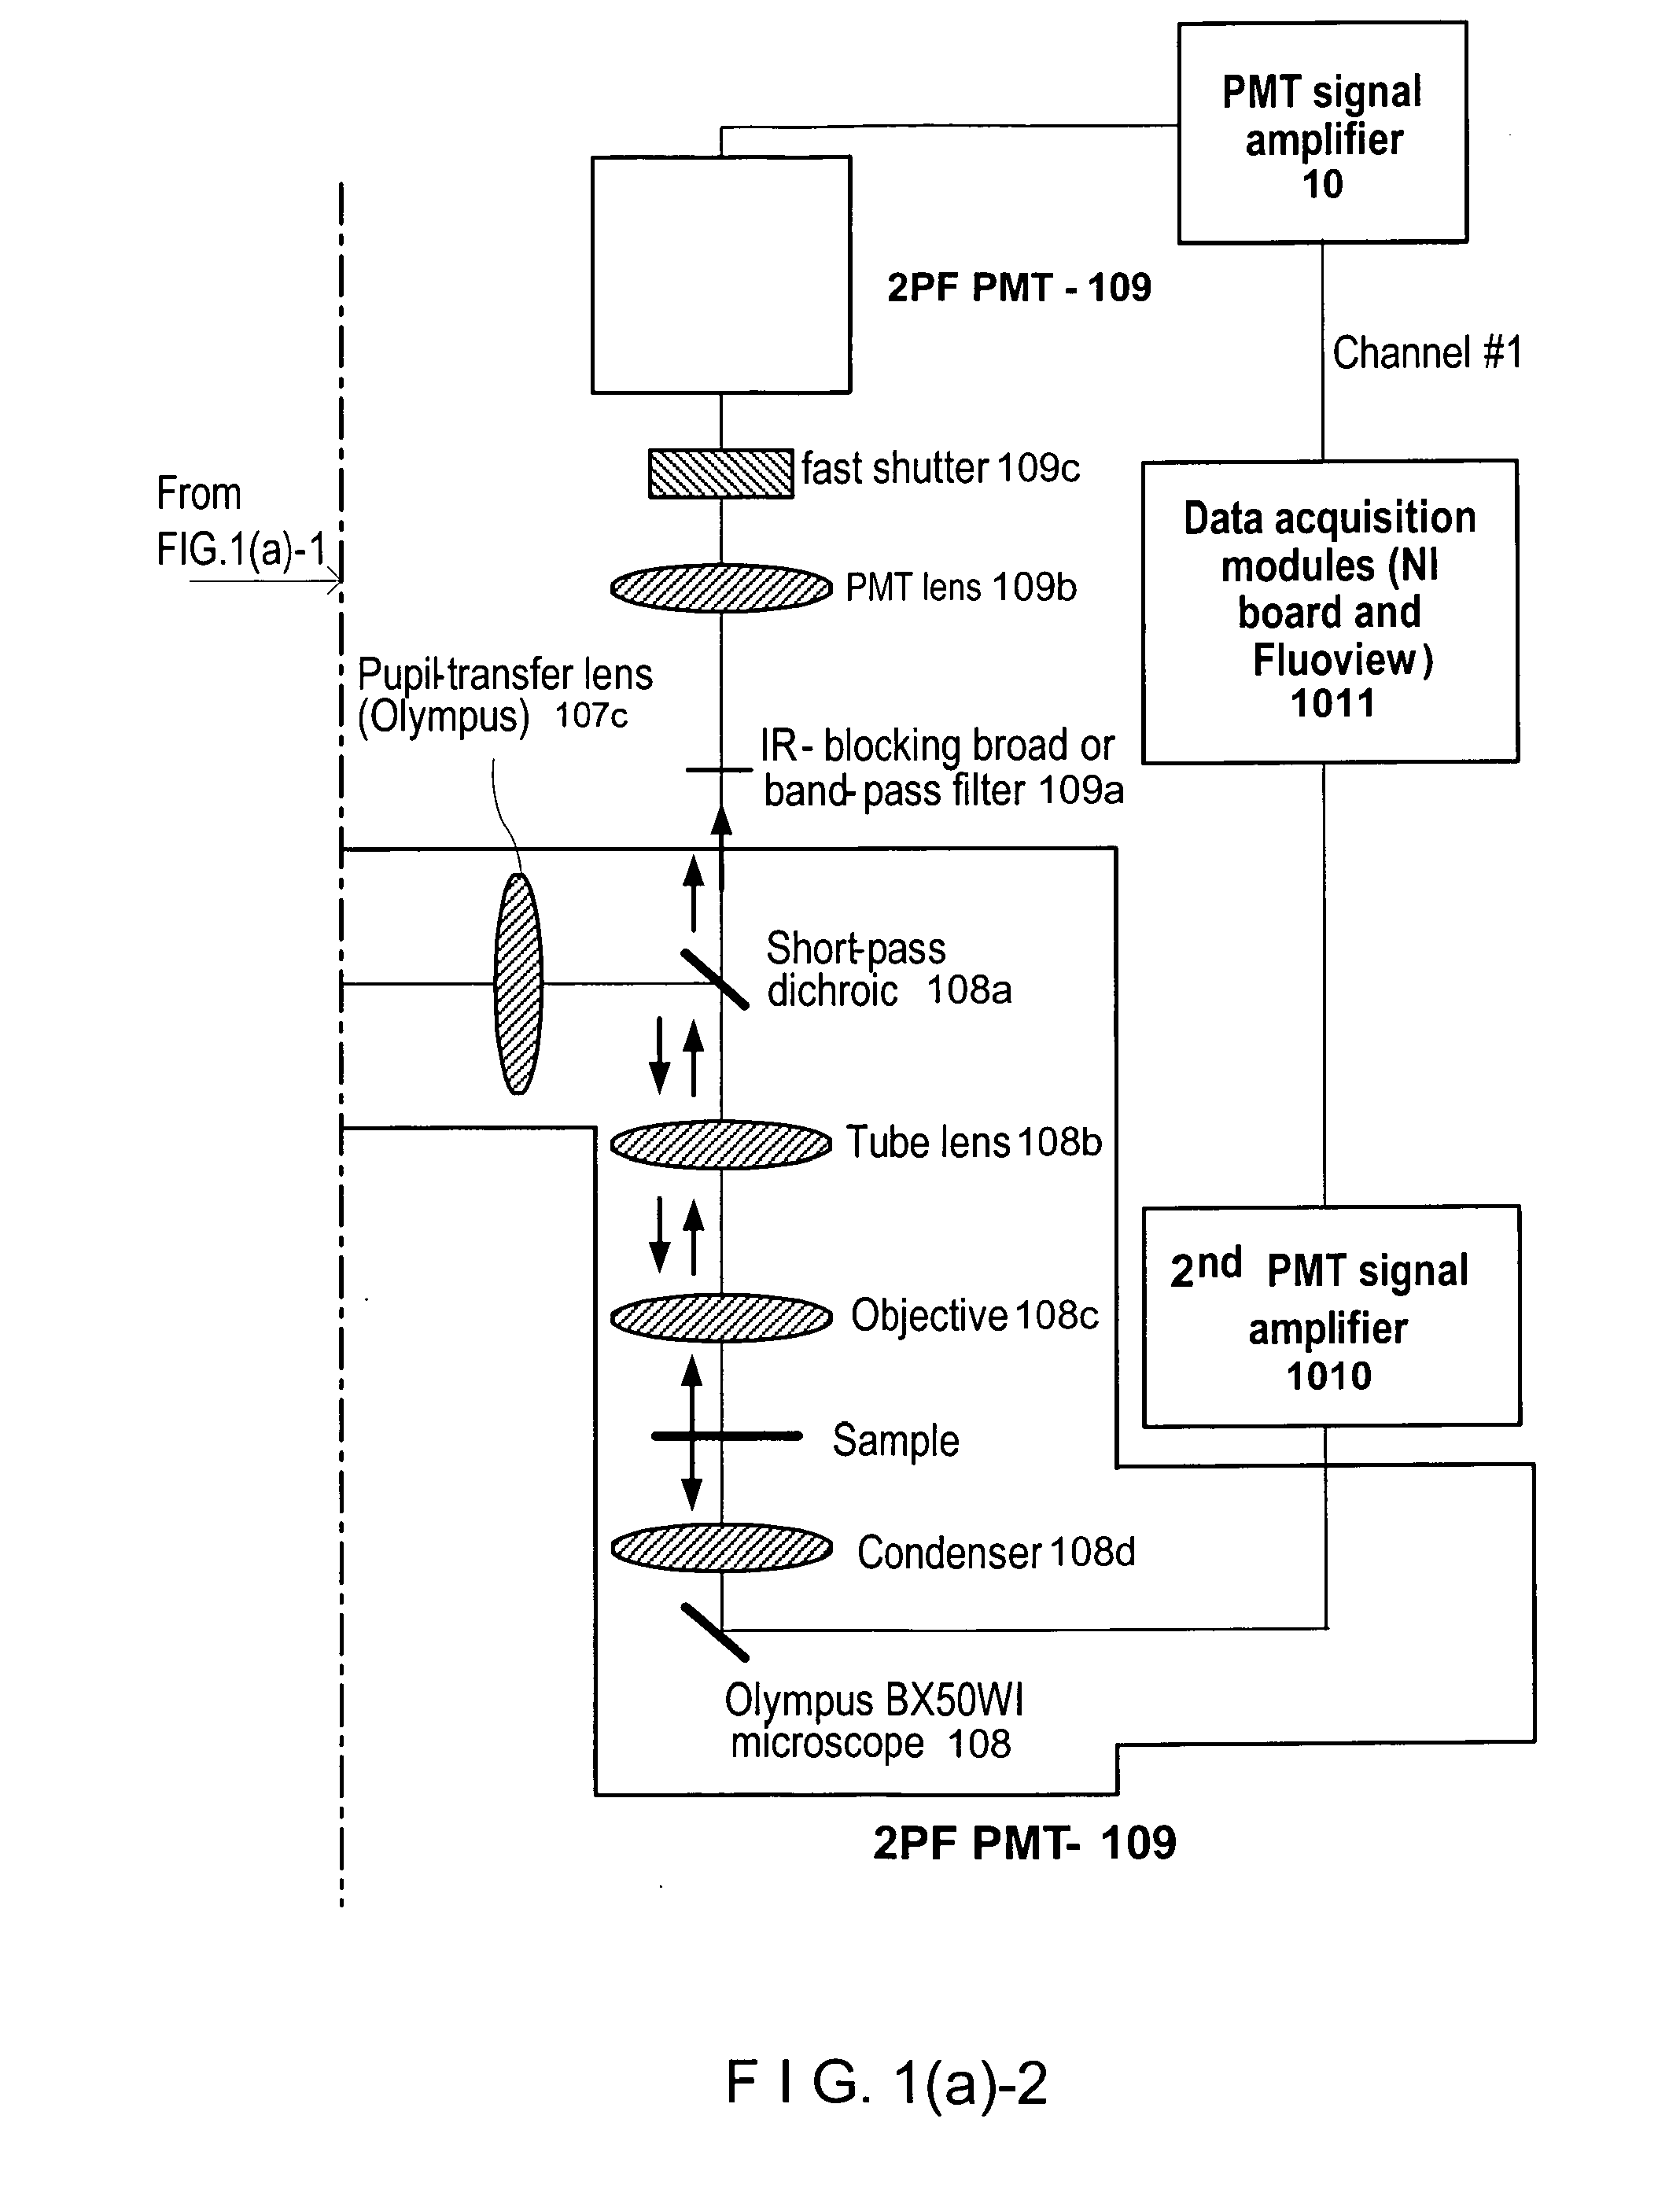 Devices, apparatus and method for providing photostimulation and imaging of structures